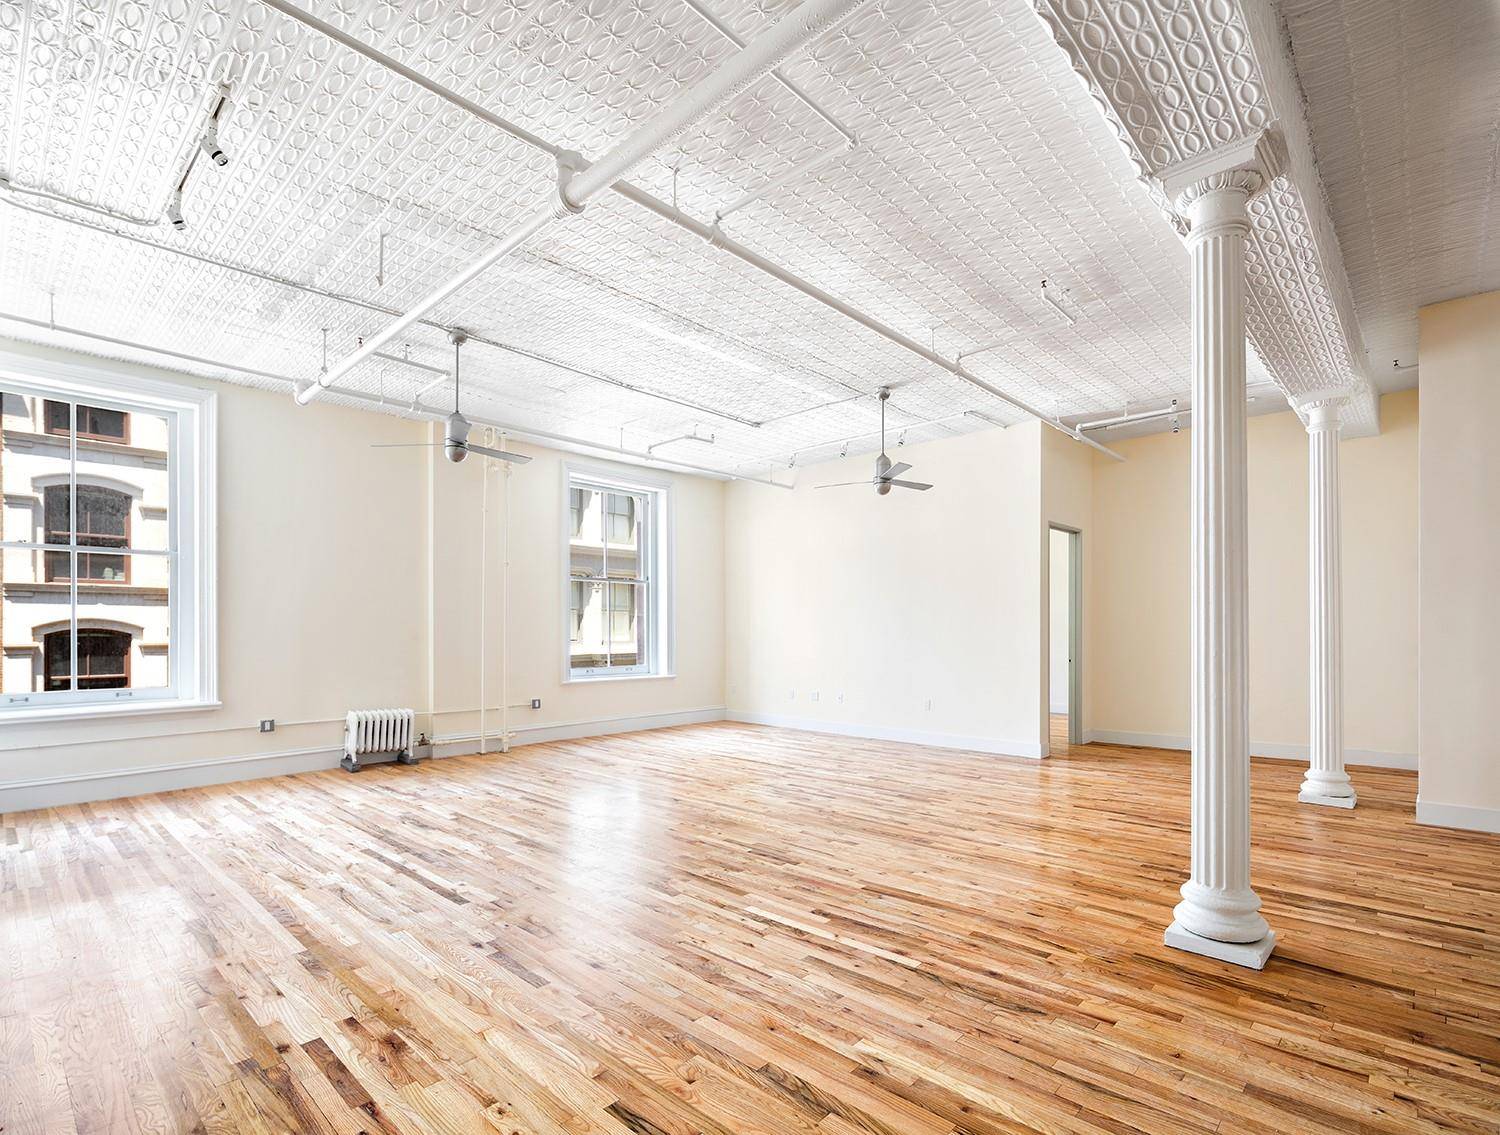 CYOF Quick Approval Process 54 Greene Street, Apartment 5A Brand New Loft in the Heart of SoHo.